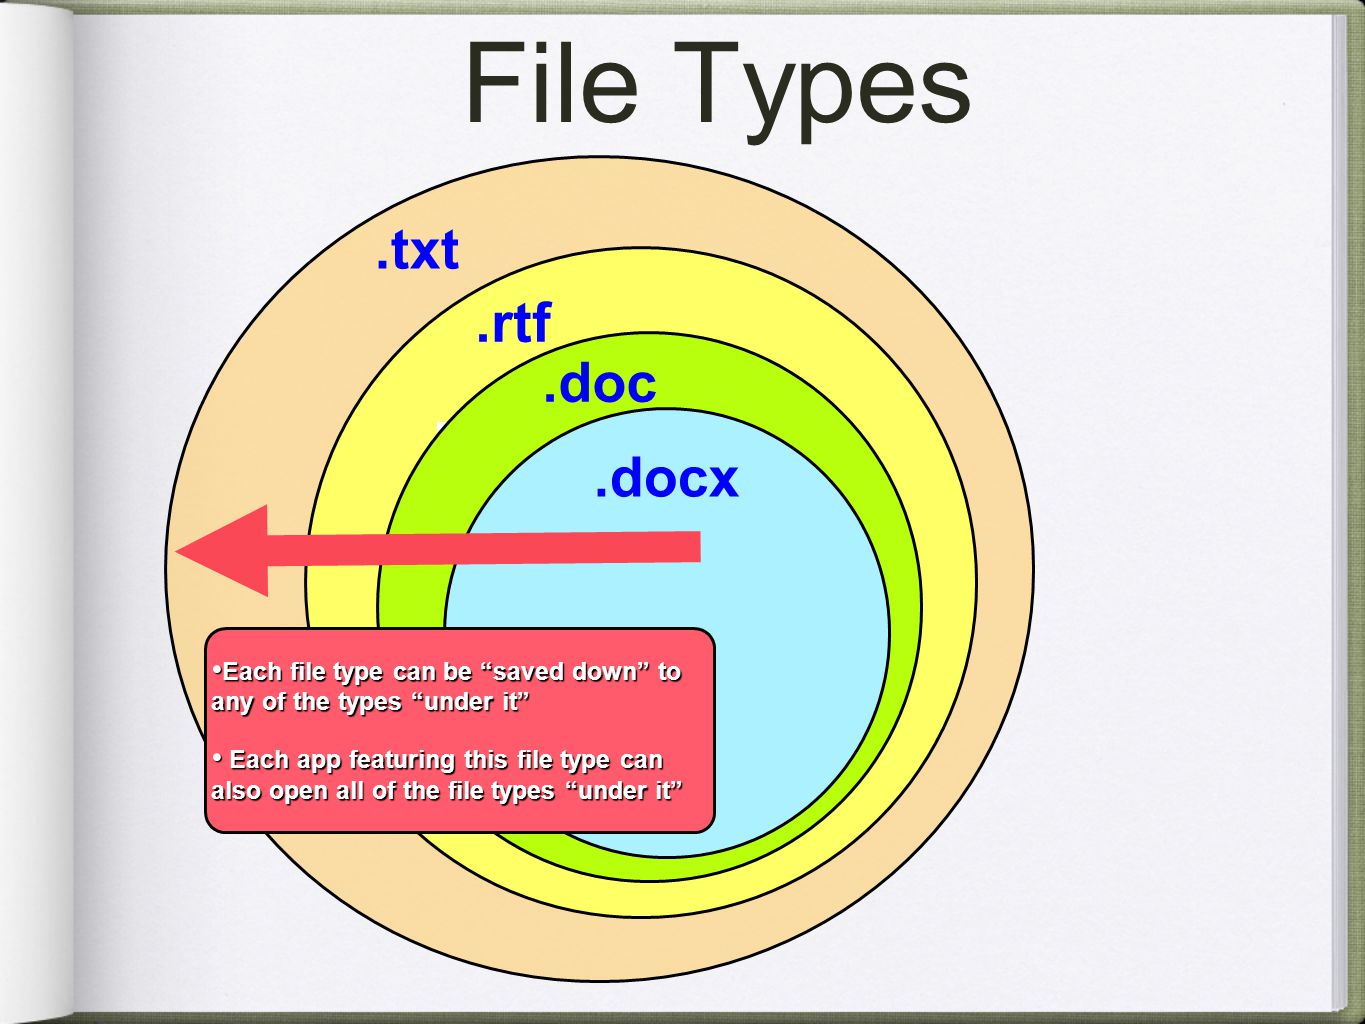 File Types.txt Sample Apps: Notepad TextEdit Stickies + Opens immediately + Every word processor in the world can read it - No formatting available.txt.rtf Rich Text Format + Retains most of the formatting + Most word processors can read - Tables, fonts might be lost Sample Apps: Appleworks Word Perfect All Open Source docs.doc + Microsoft Word for Windows until Microsoft Word for Mac until Nothing stays static!.docx Each file type can be saved down to any of the types under it Each file type can be saved down to any of the types under it Each app featuring this file type can also open all of the file types under it Each app featuring this file type can also open all of the file types under it